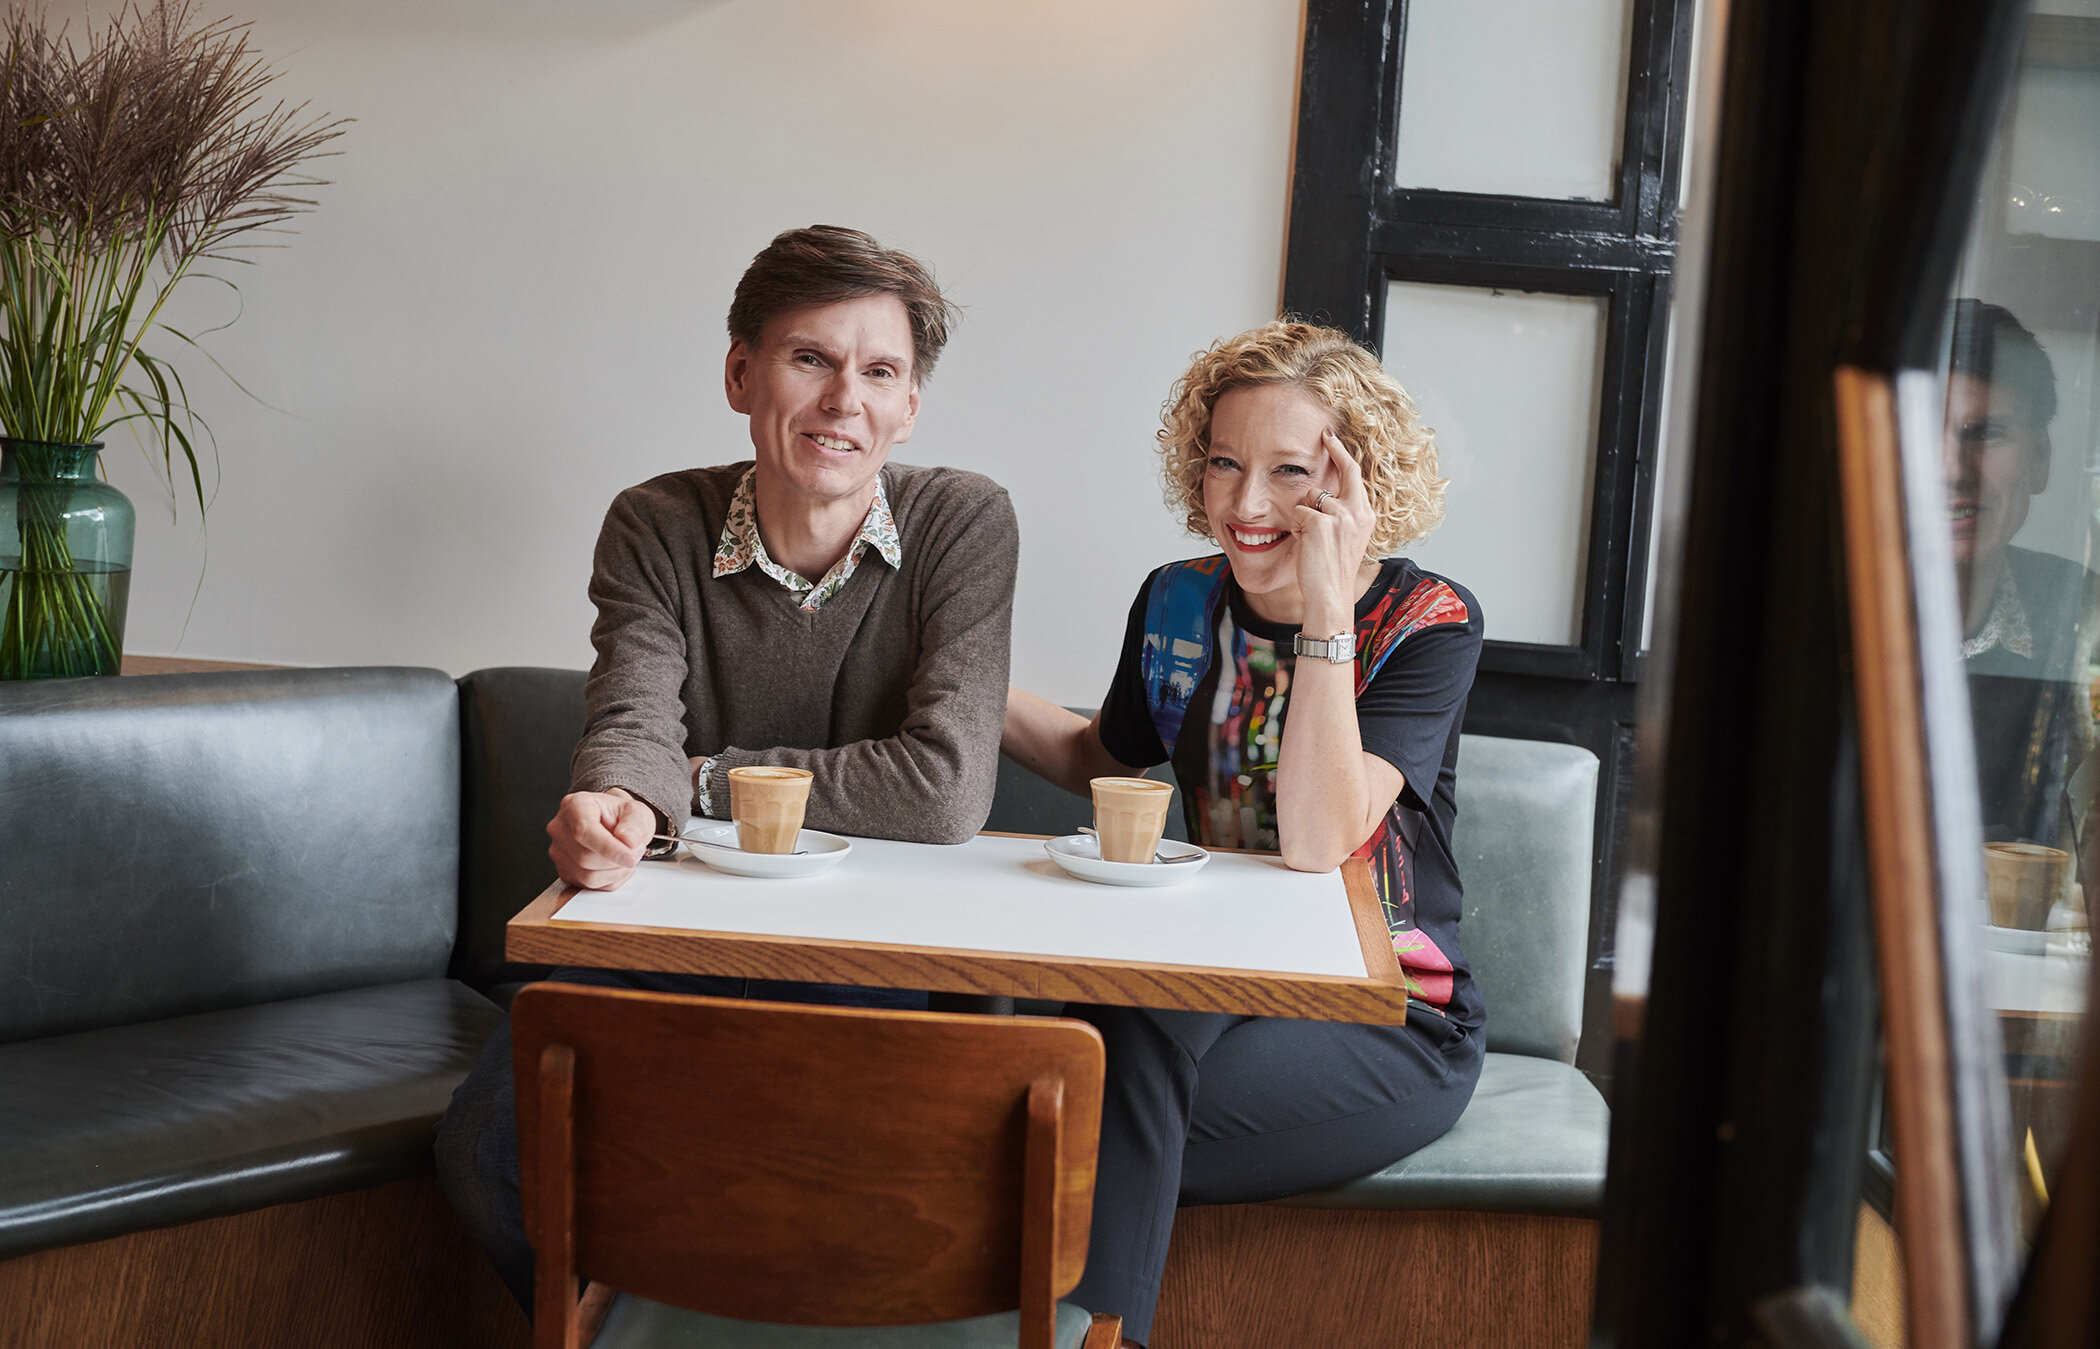 Channel 4 News anchor Cathy Newman, with her husband John O'Conn